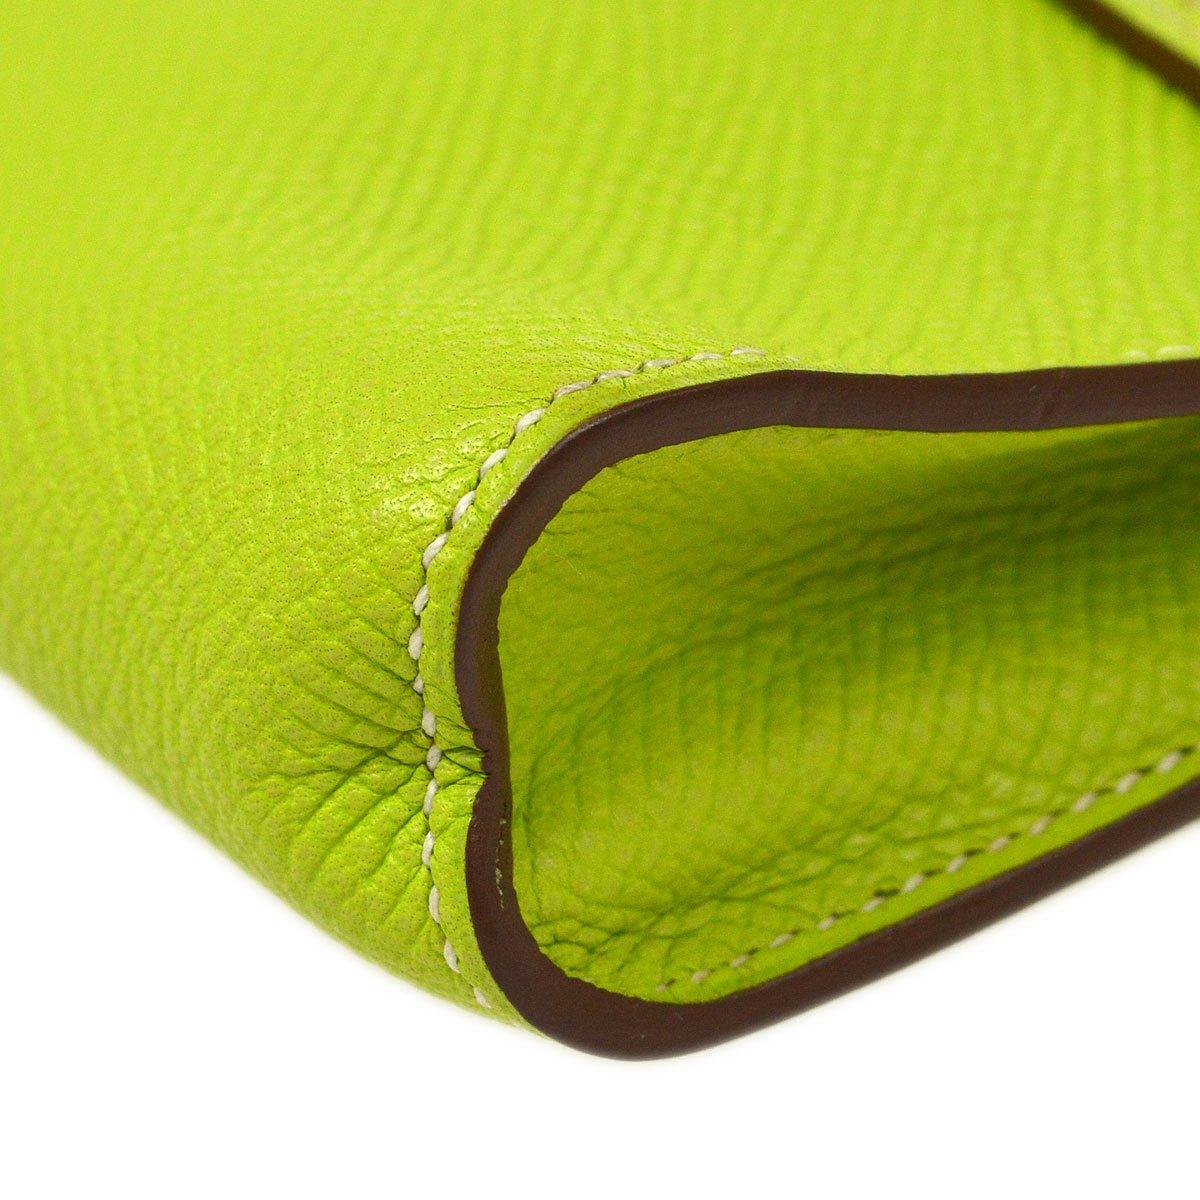 HERMES Tiny Birkin 15 Retourne Lime Green Epsom Leather Mini Shoulder Bag In Excellent Condition For Sale In Chicago, IL